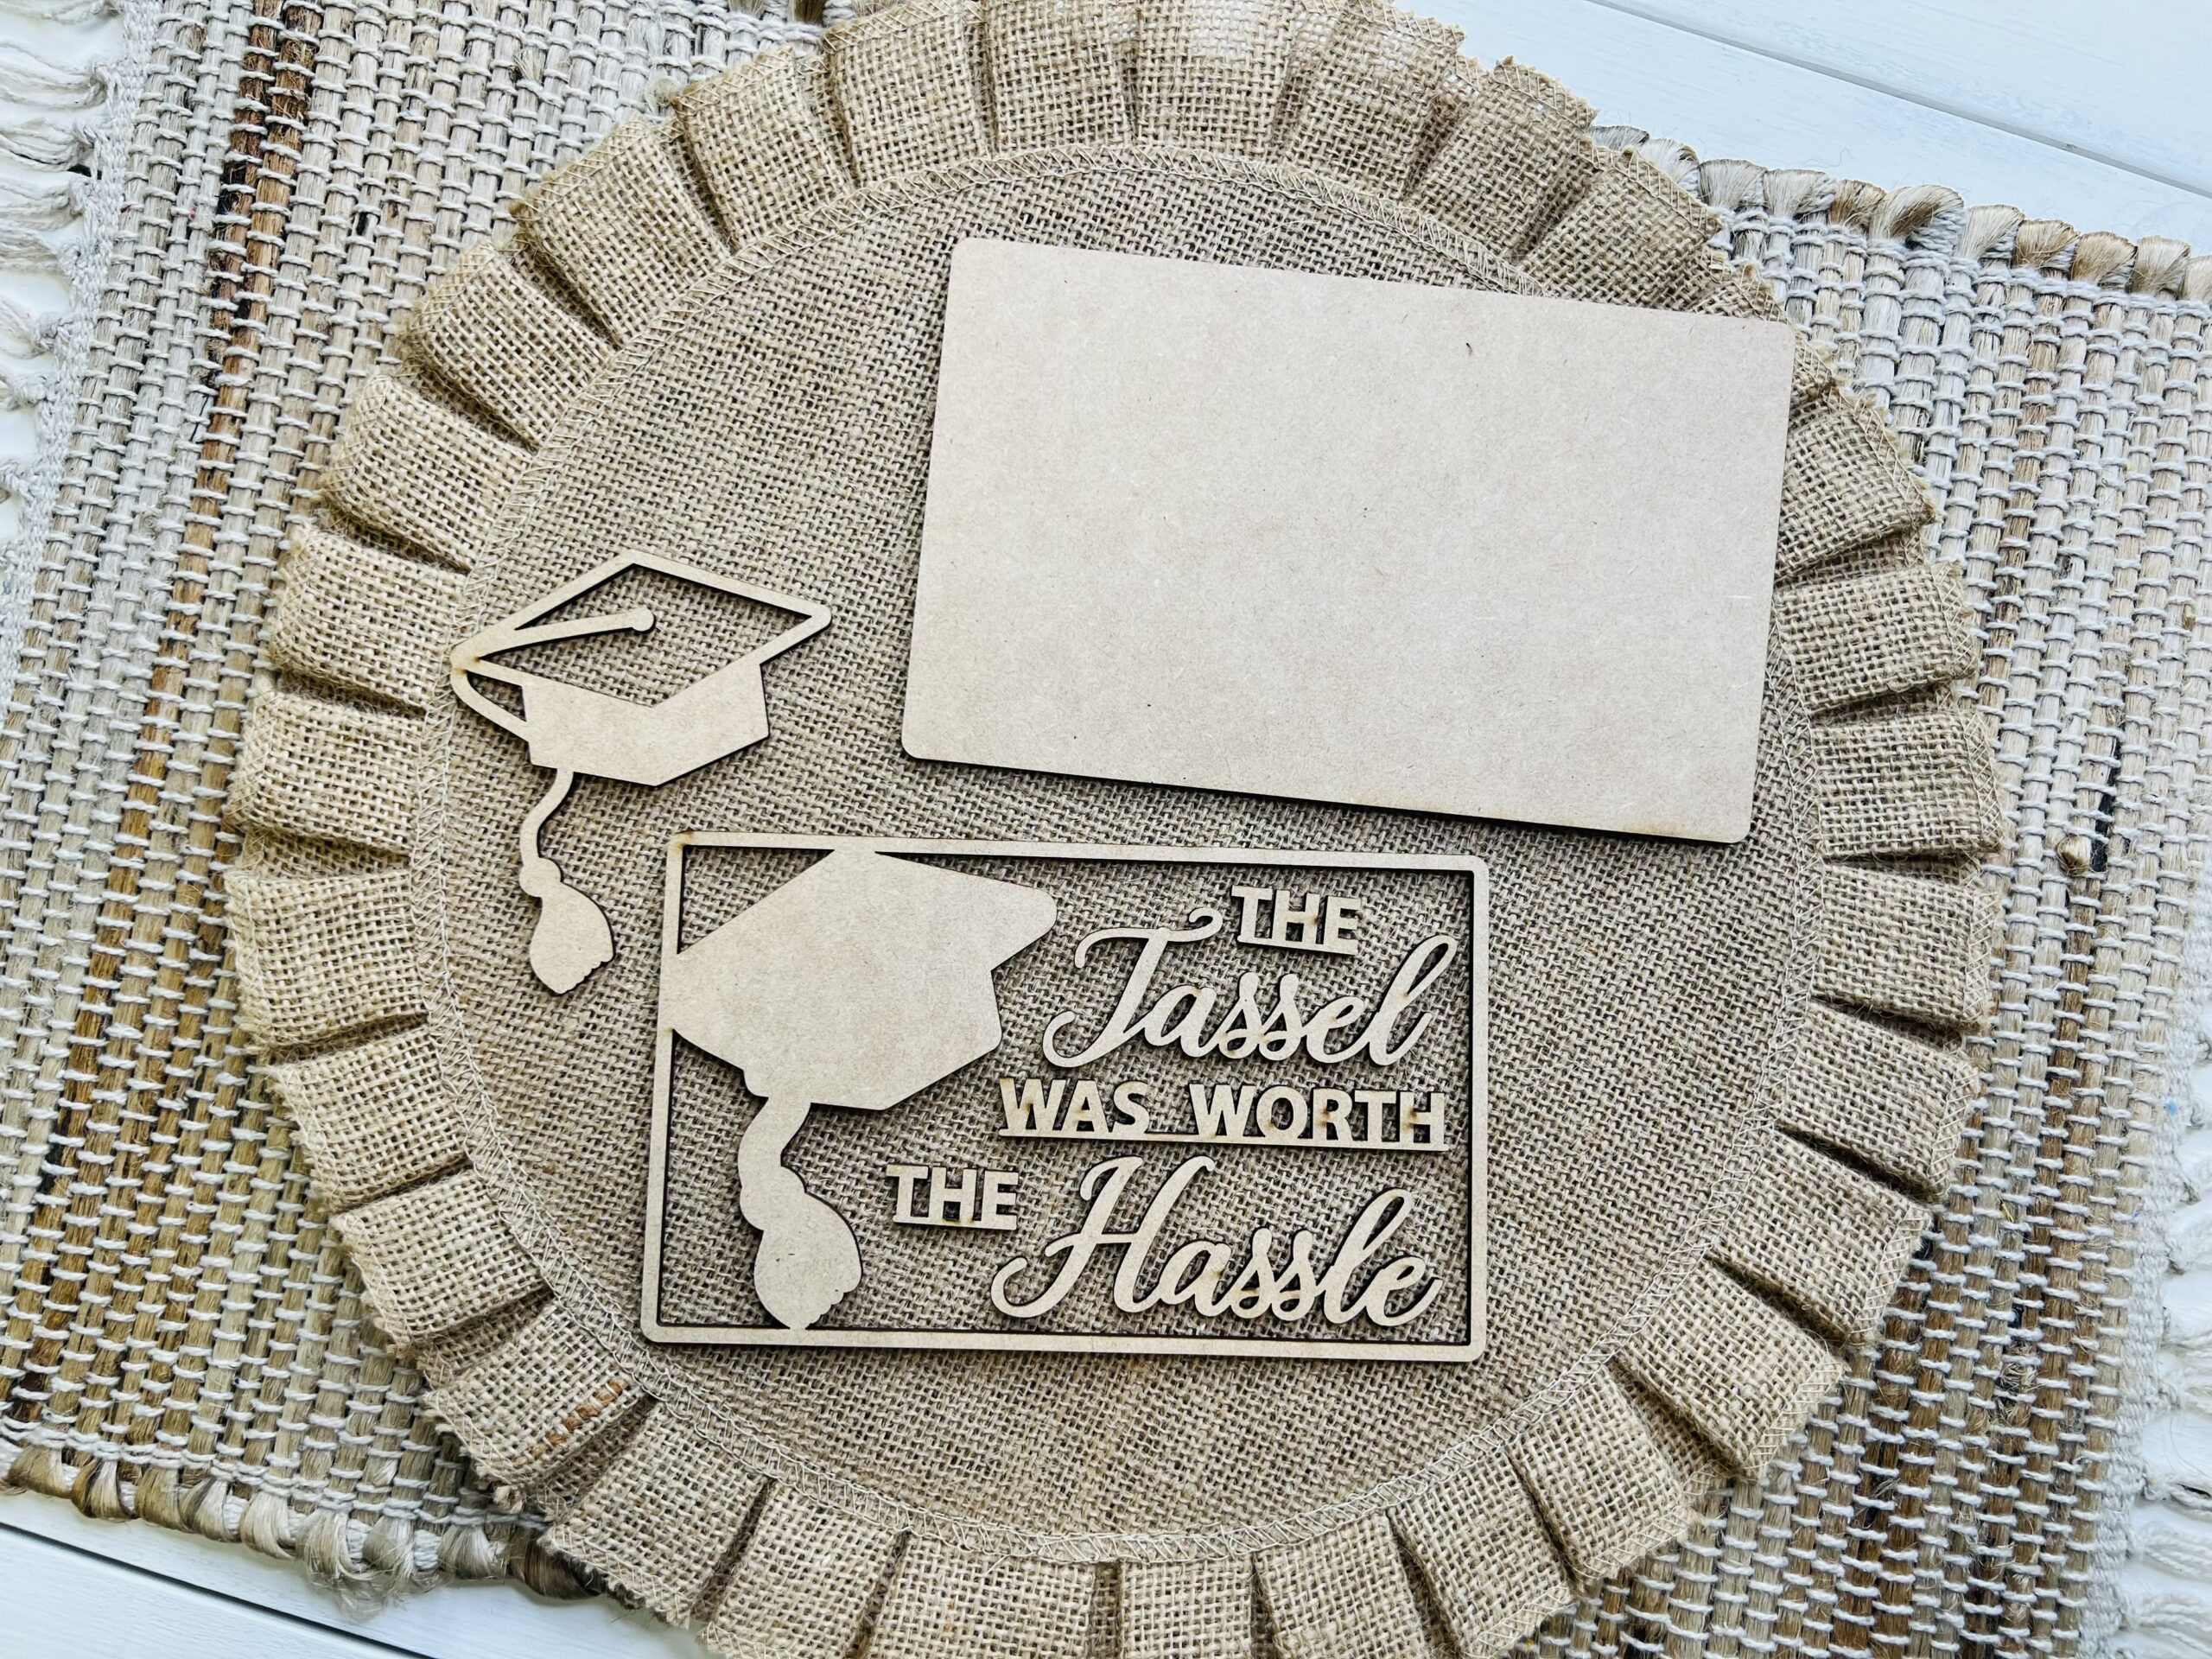 This is a wood cutout set for crafting. This wood cutout set includes individual pieces that can be assembled together to create a graduation themed craft